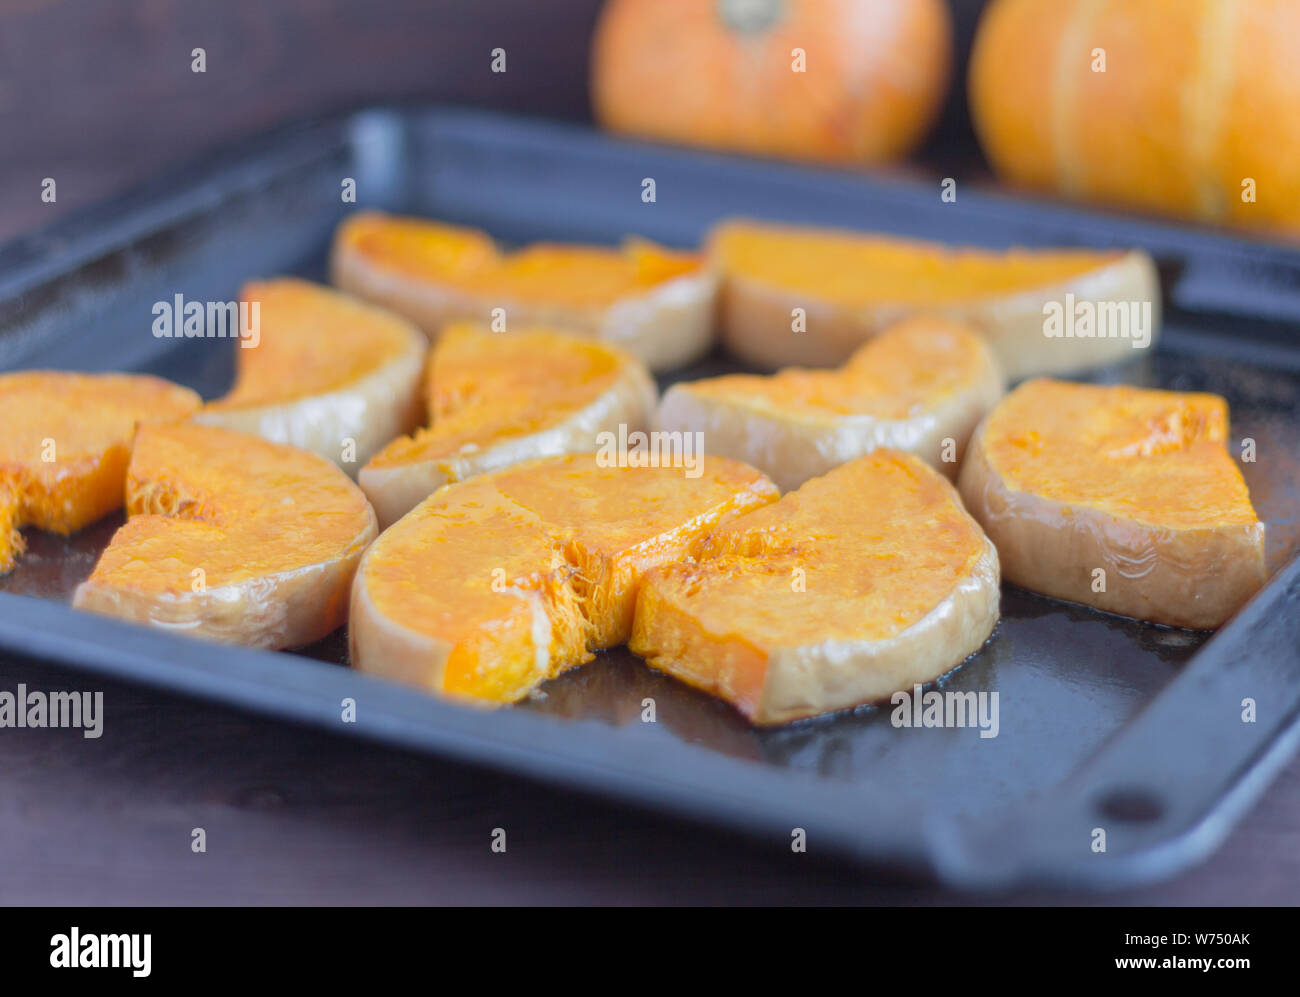 delicious baked pumpkin in the oven,delicious autumn vegetable Stock Photo